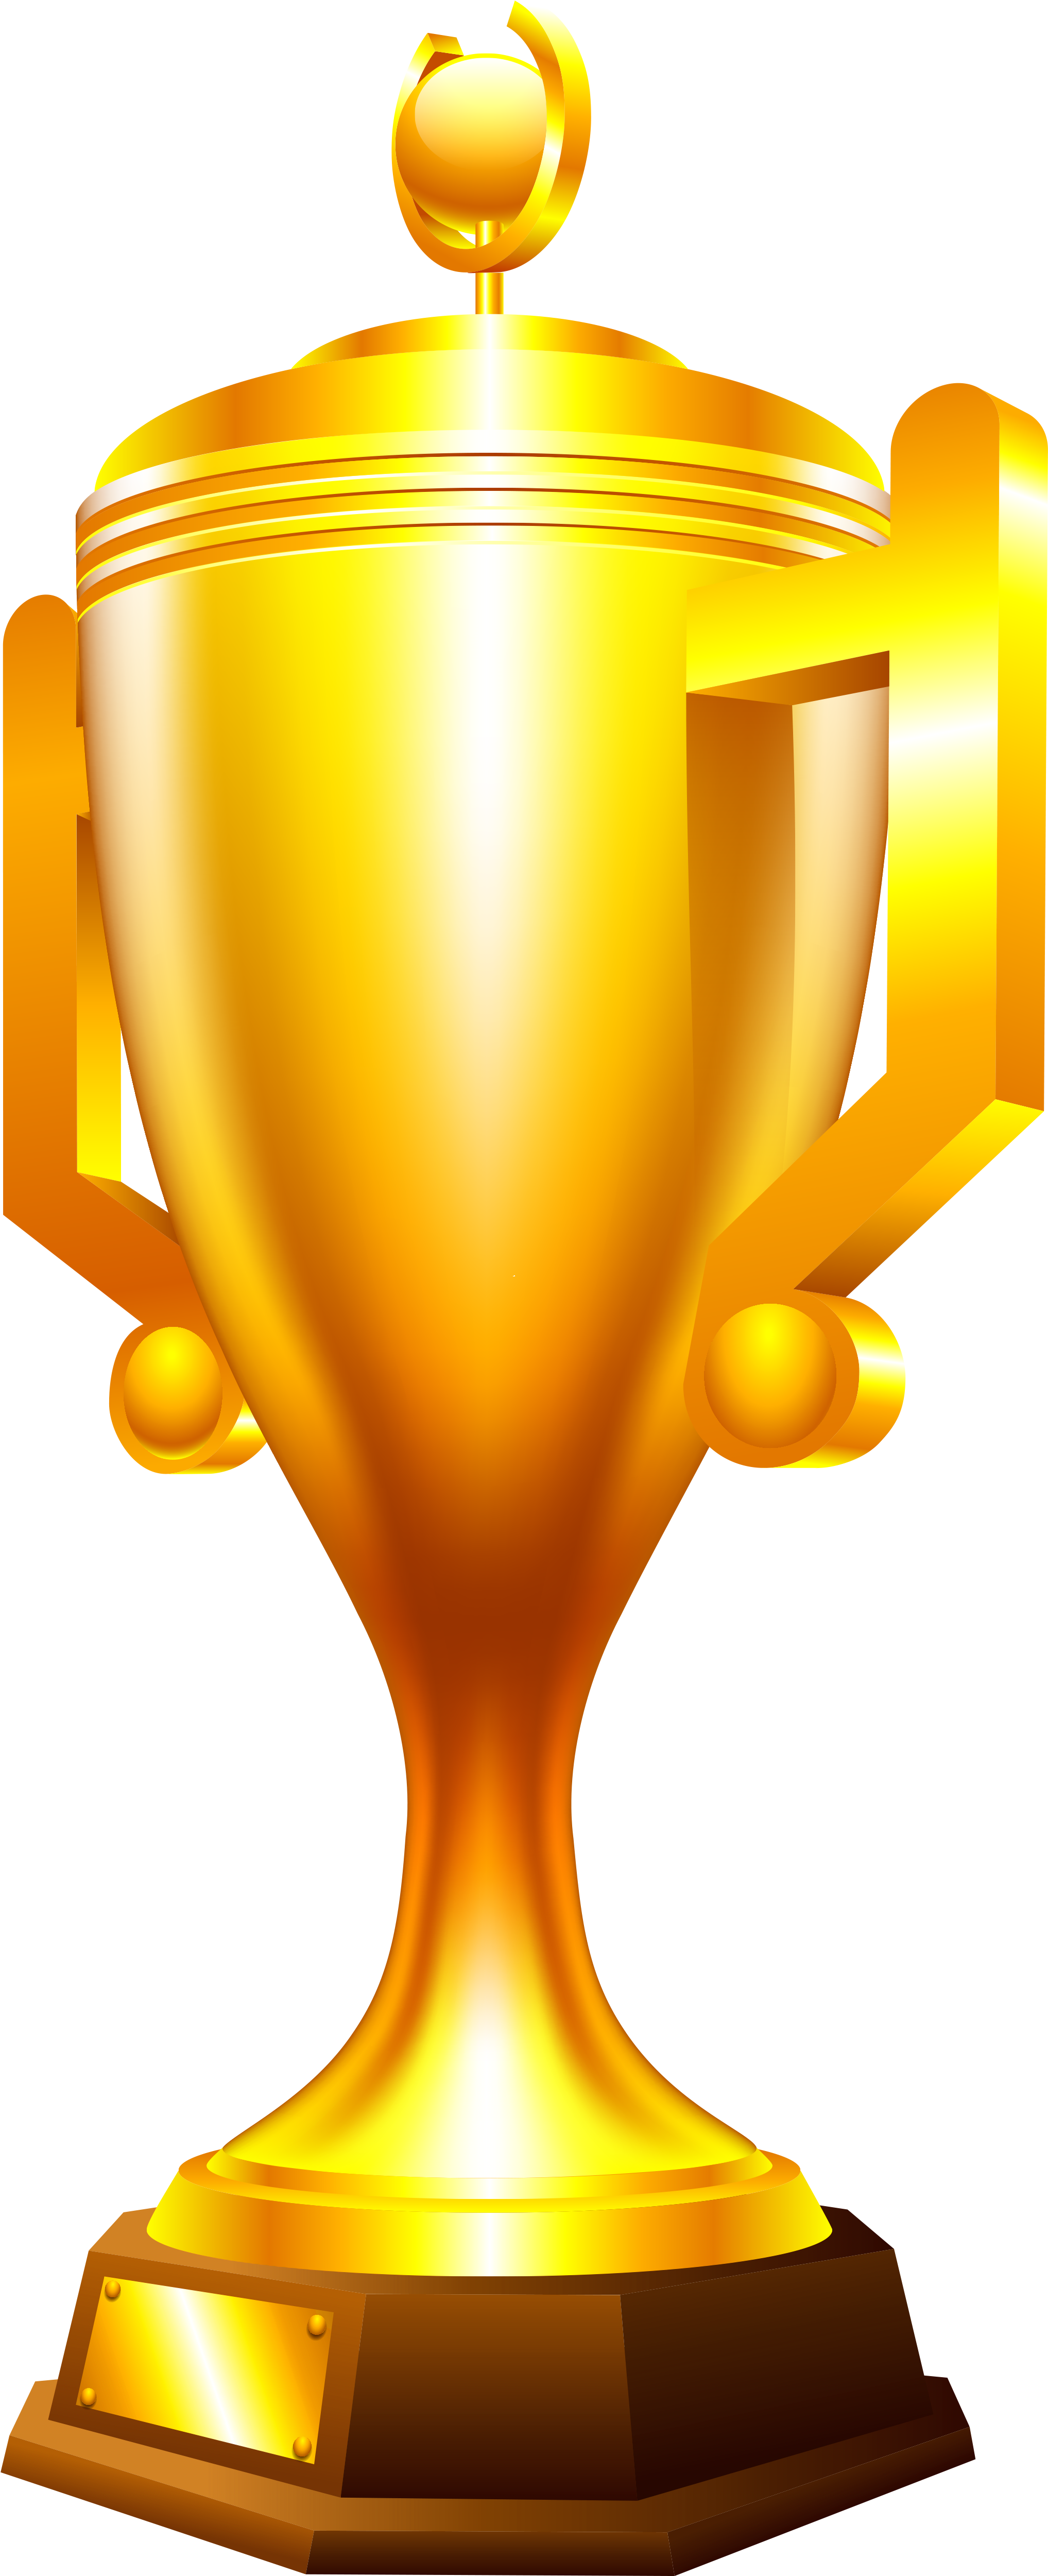 Golden Cup Vector PNG Pic HQ